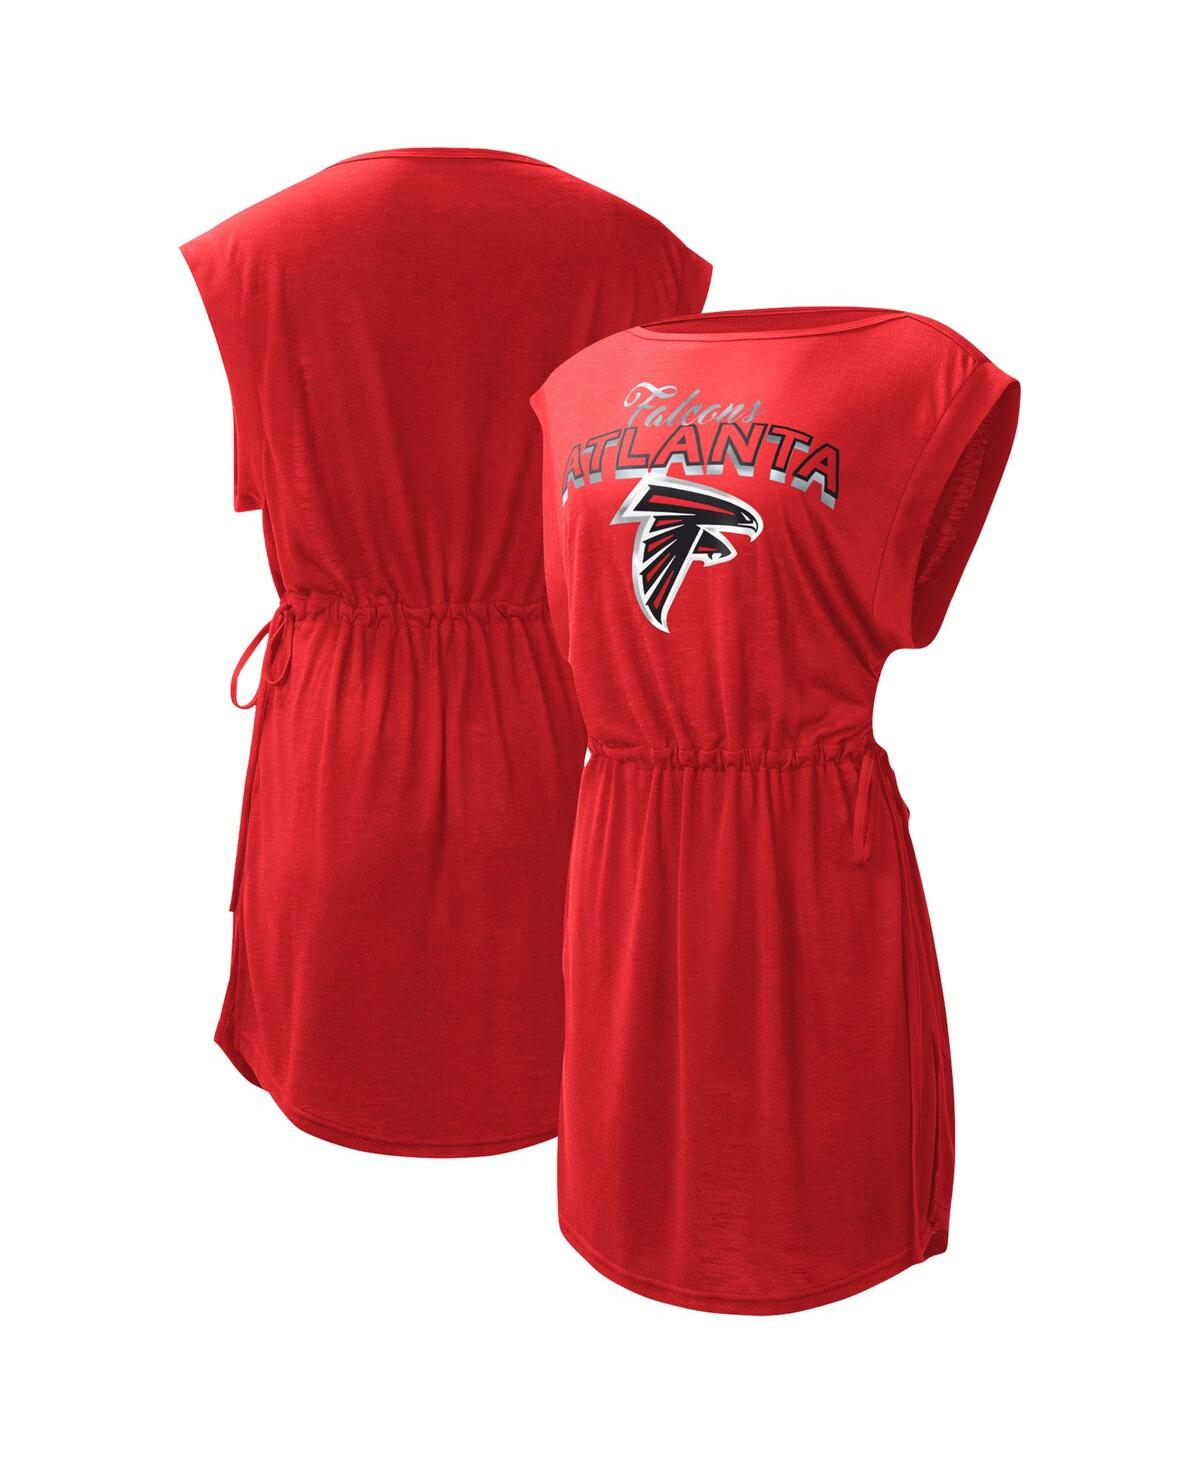 G-III 4HER BY CARL BANKS WOMEN'S G-III 4HER BY CARL BANKS RED ATLANTA FALCONS G.O.A.T. LOGO SWIMSUIT COVER-UP